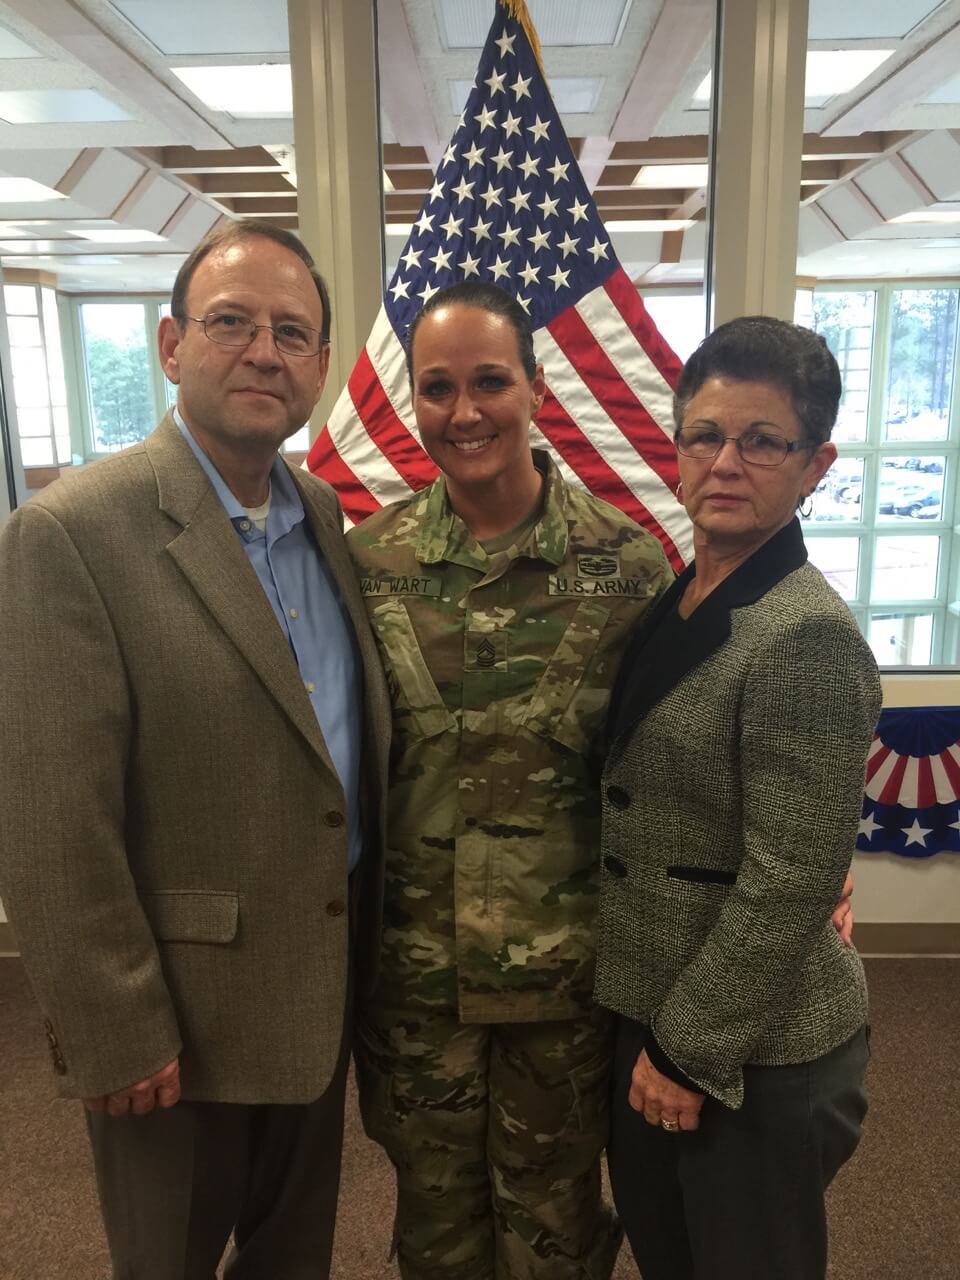 Gary with his Wife Sandy at their daughter’s promotion to Master Sgt at Ft Bragg, NC